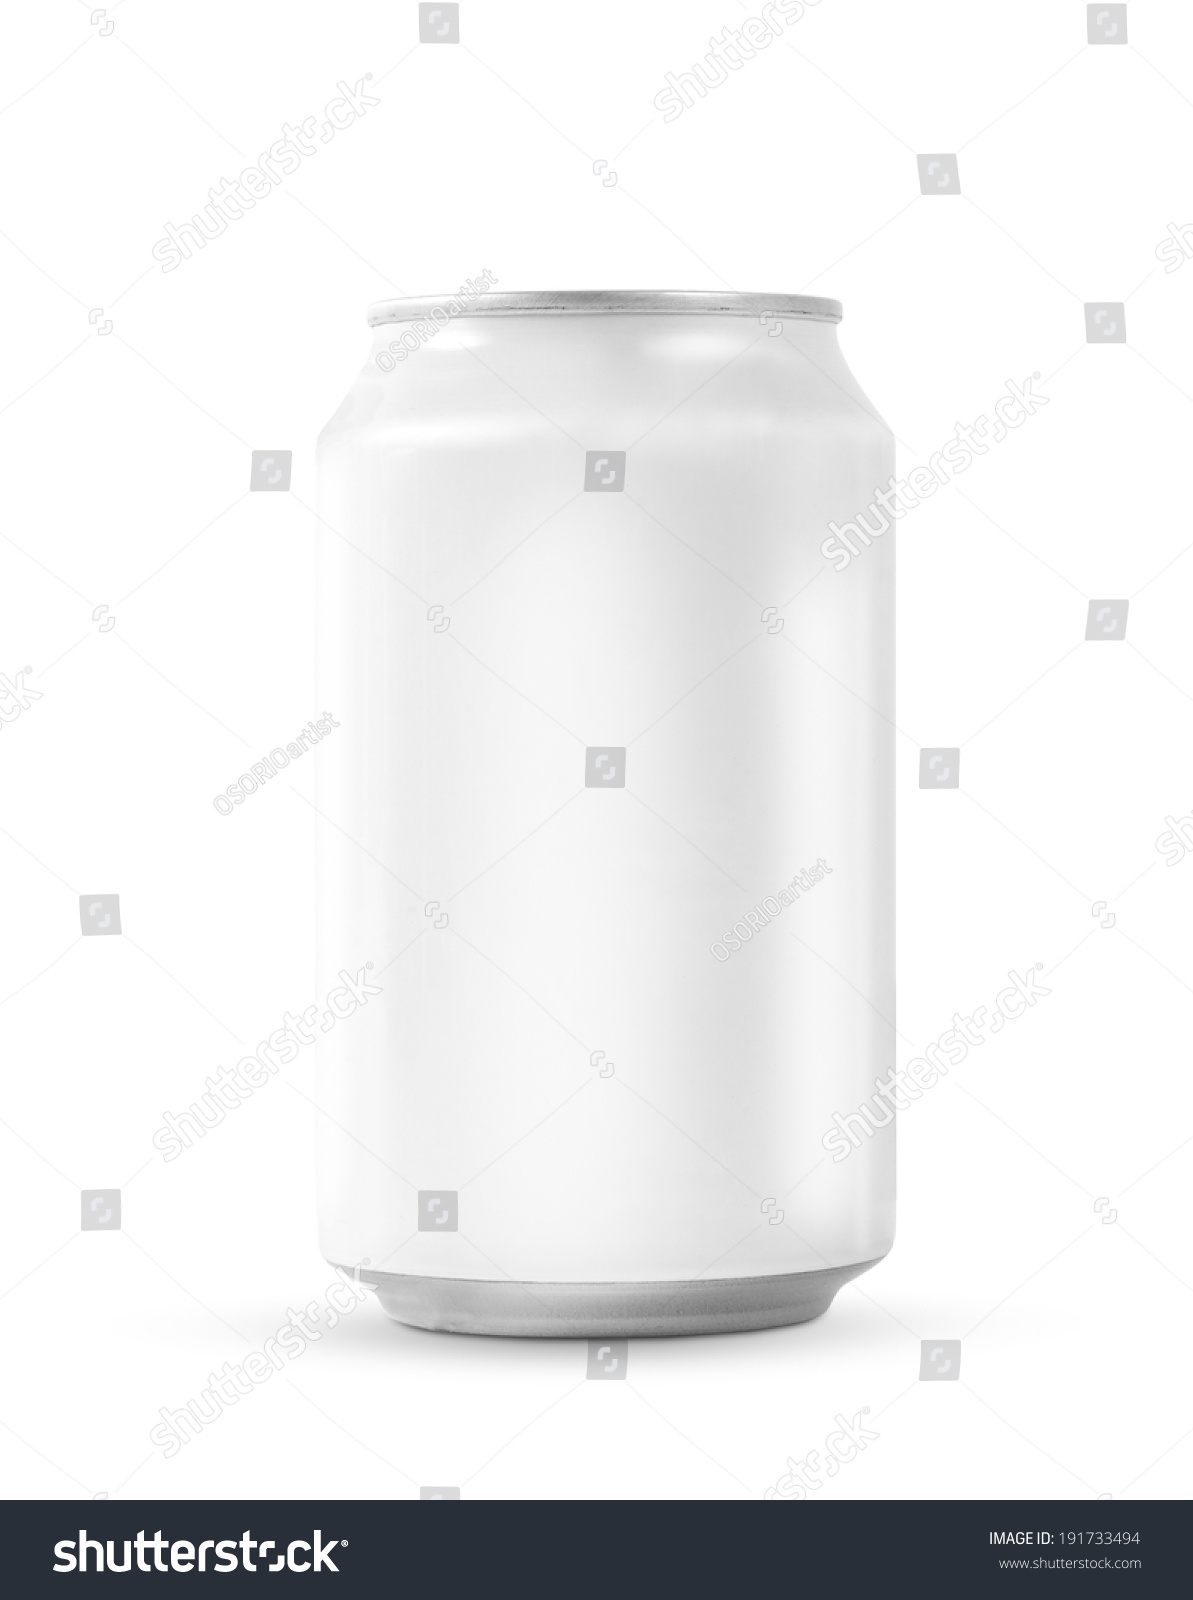 Aluminum White Soda Can Isolated On Stock Photo 191733494 | Shutterstock